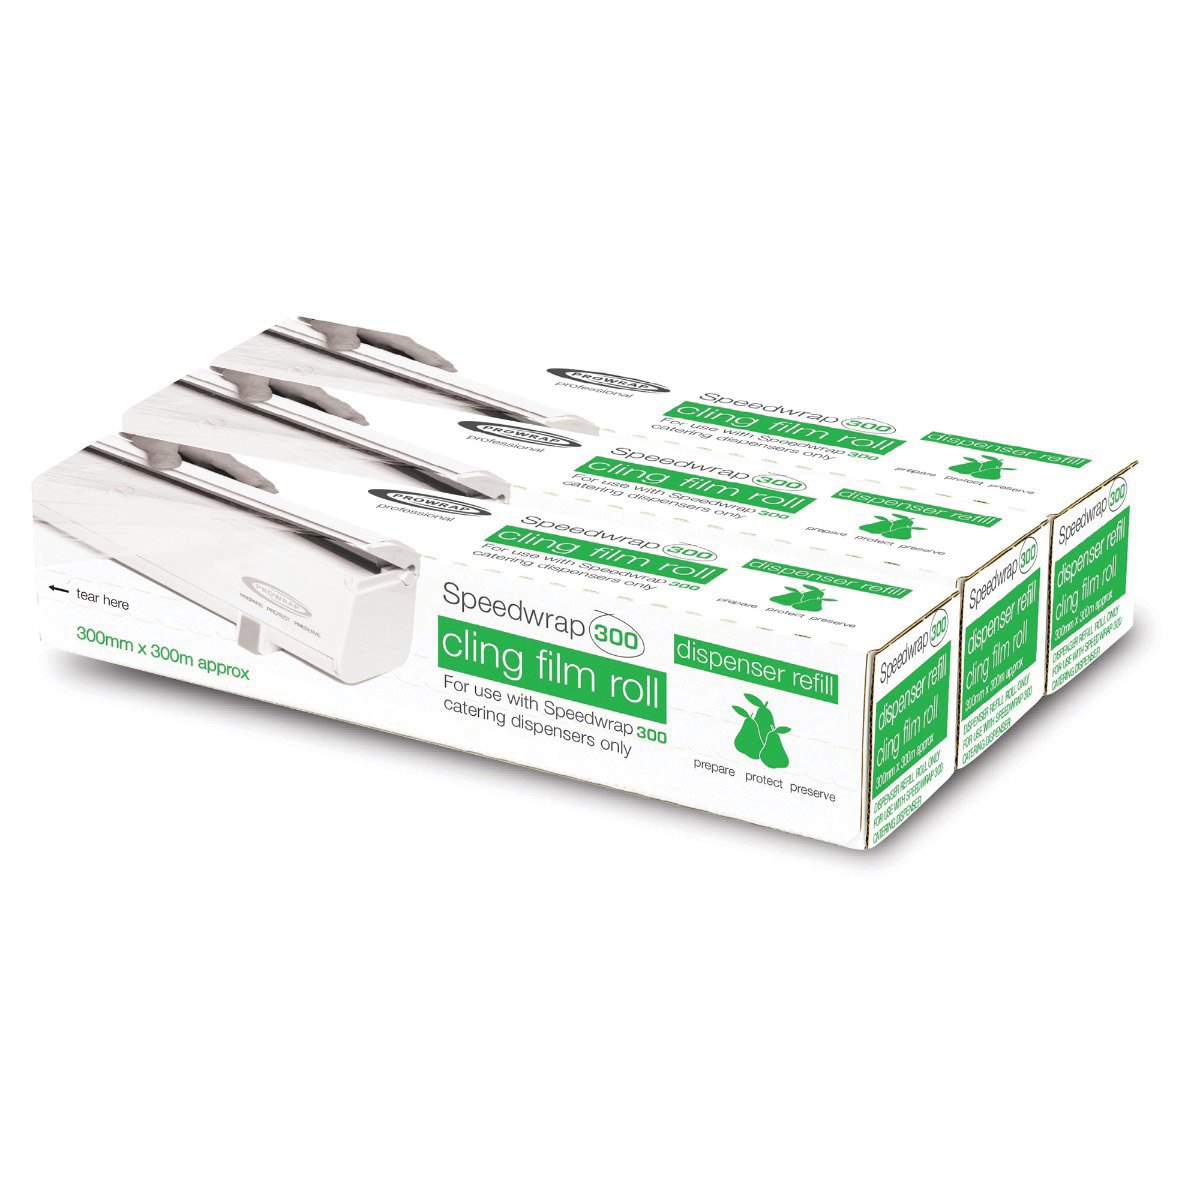 Cling Film 30cmx300m to fit Speedwrap Dispenser - Pack of 3